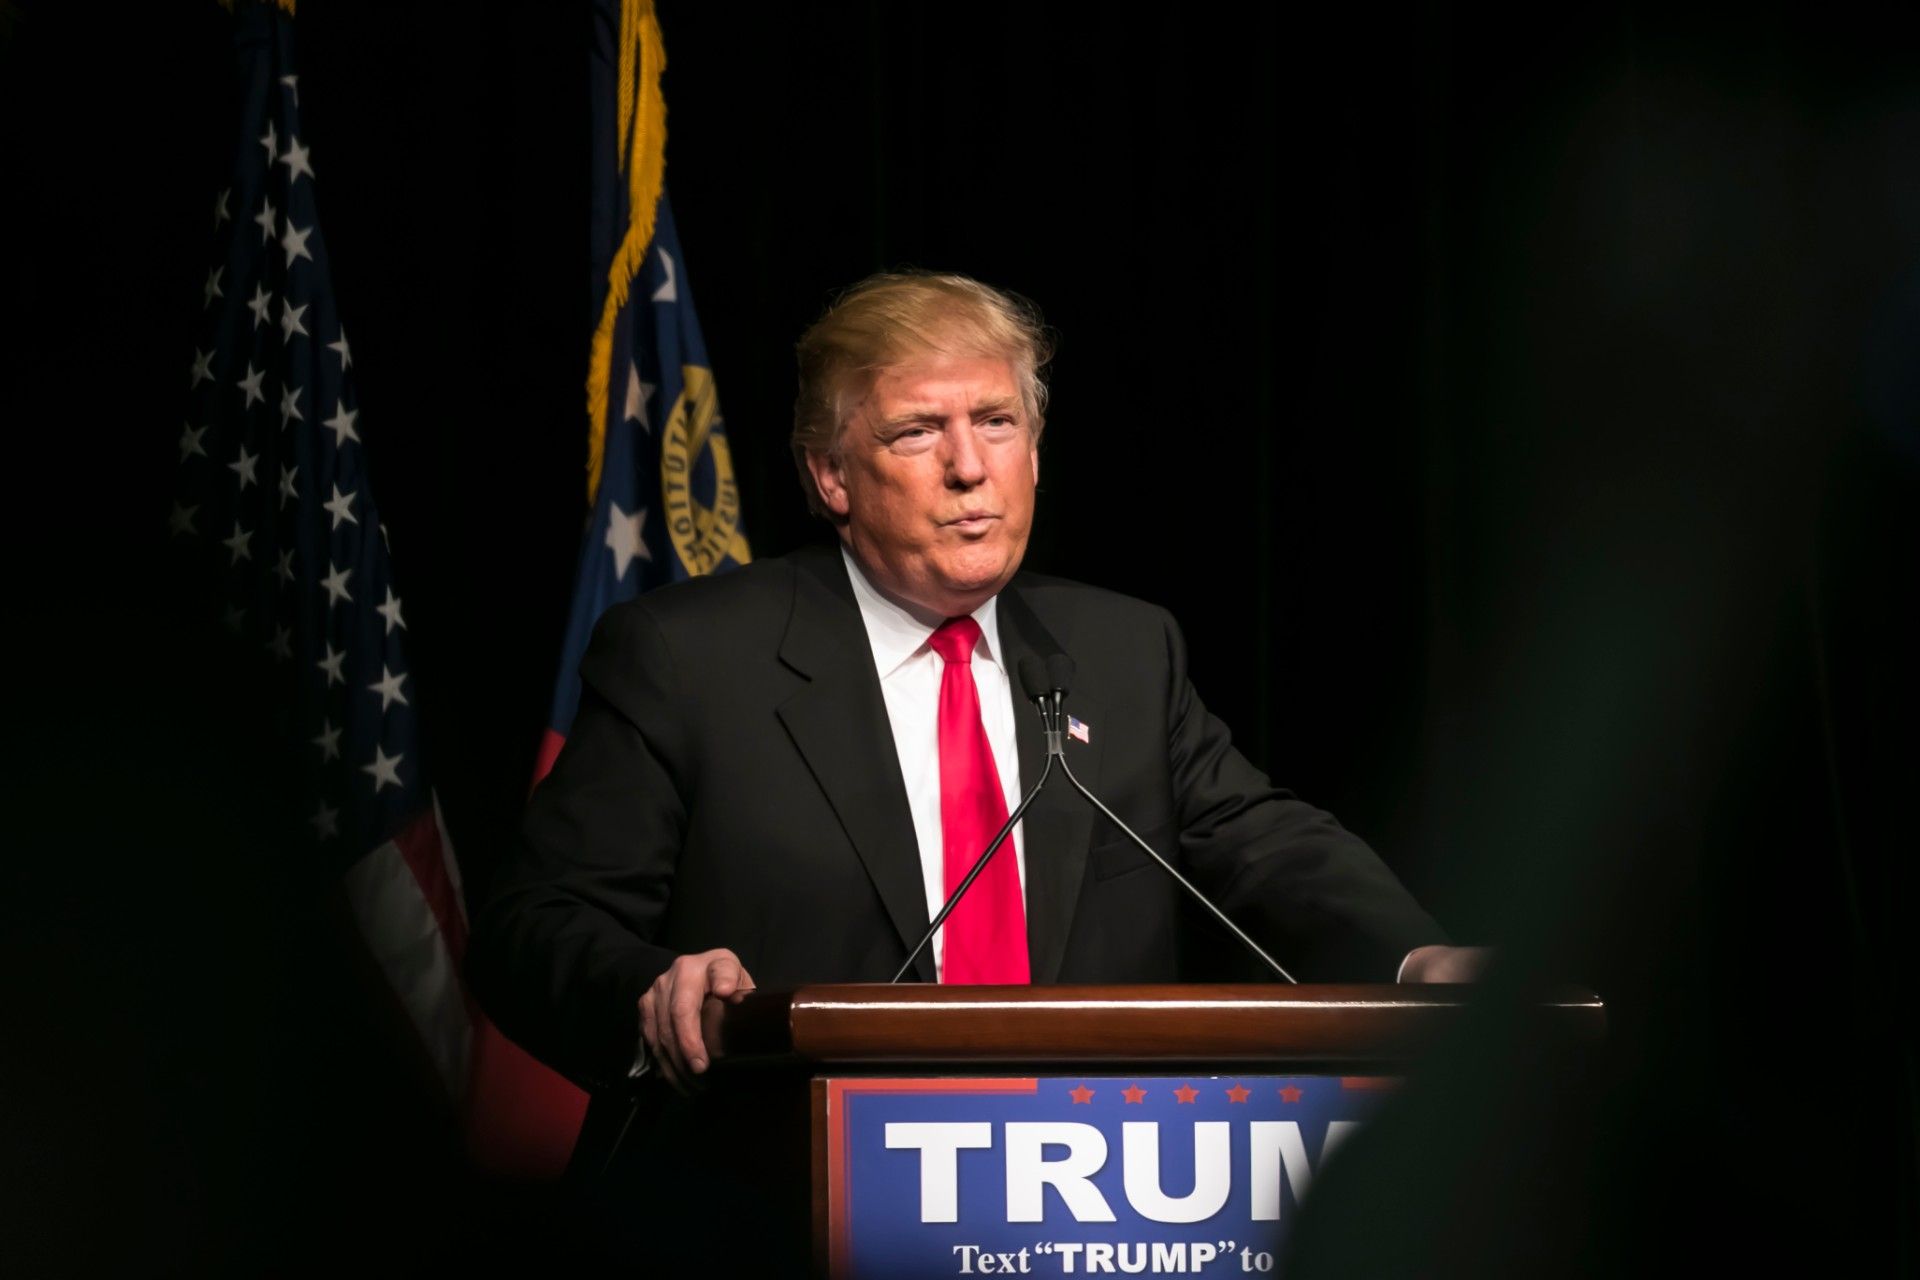 Donald Trump at podium during 2016 campaign - voting by mail